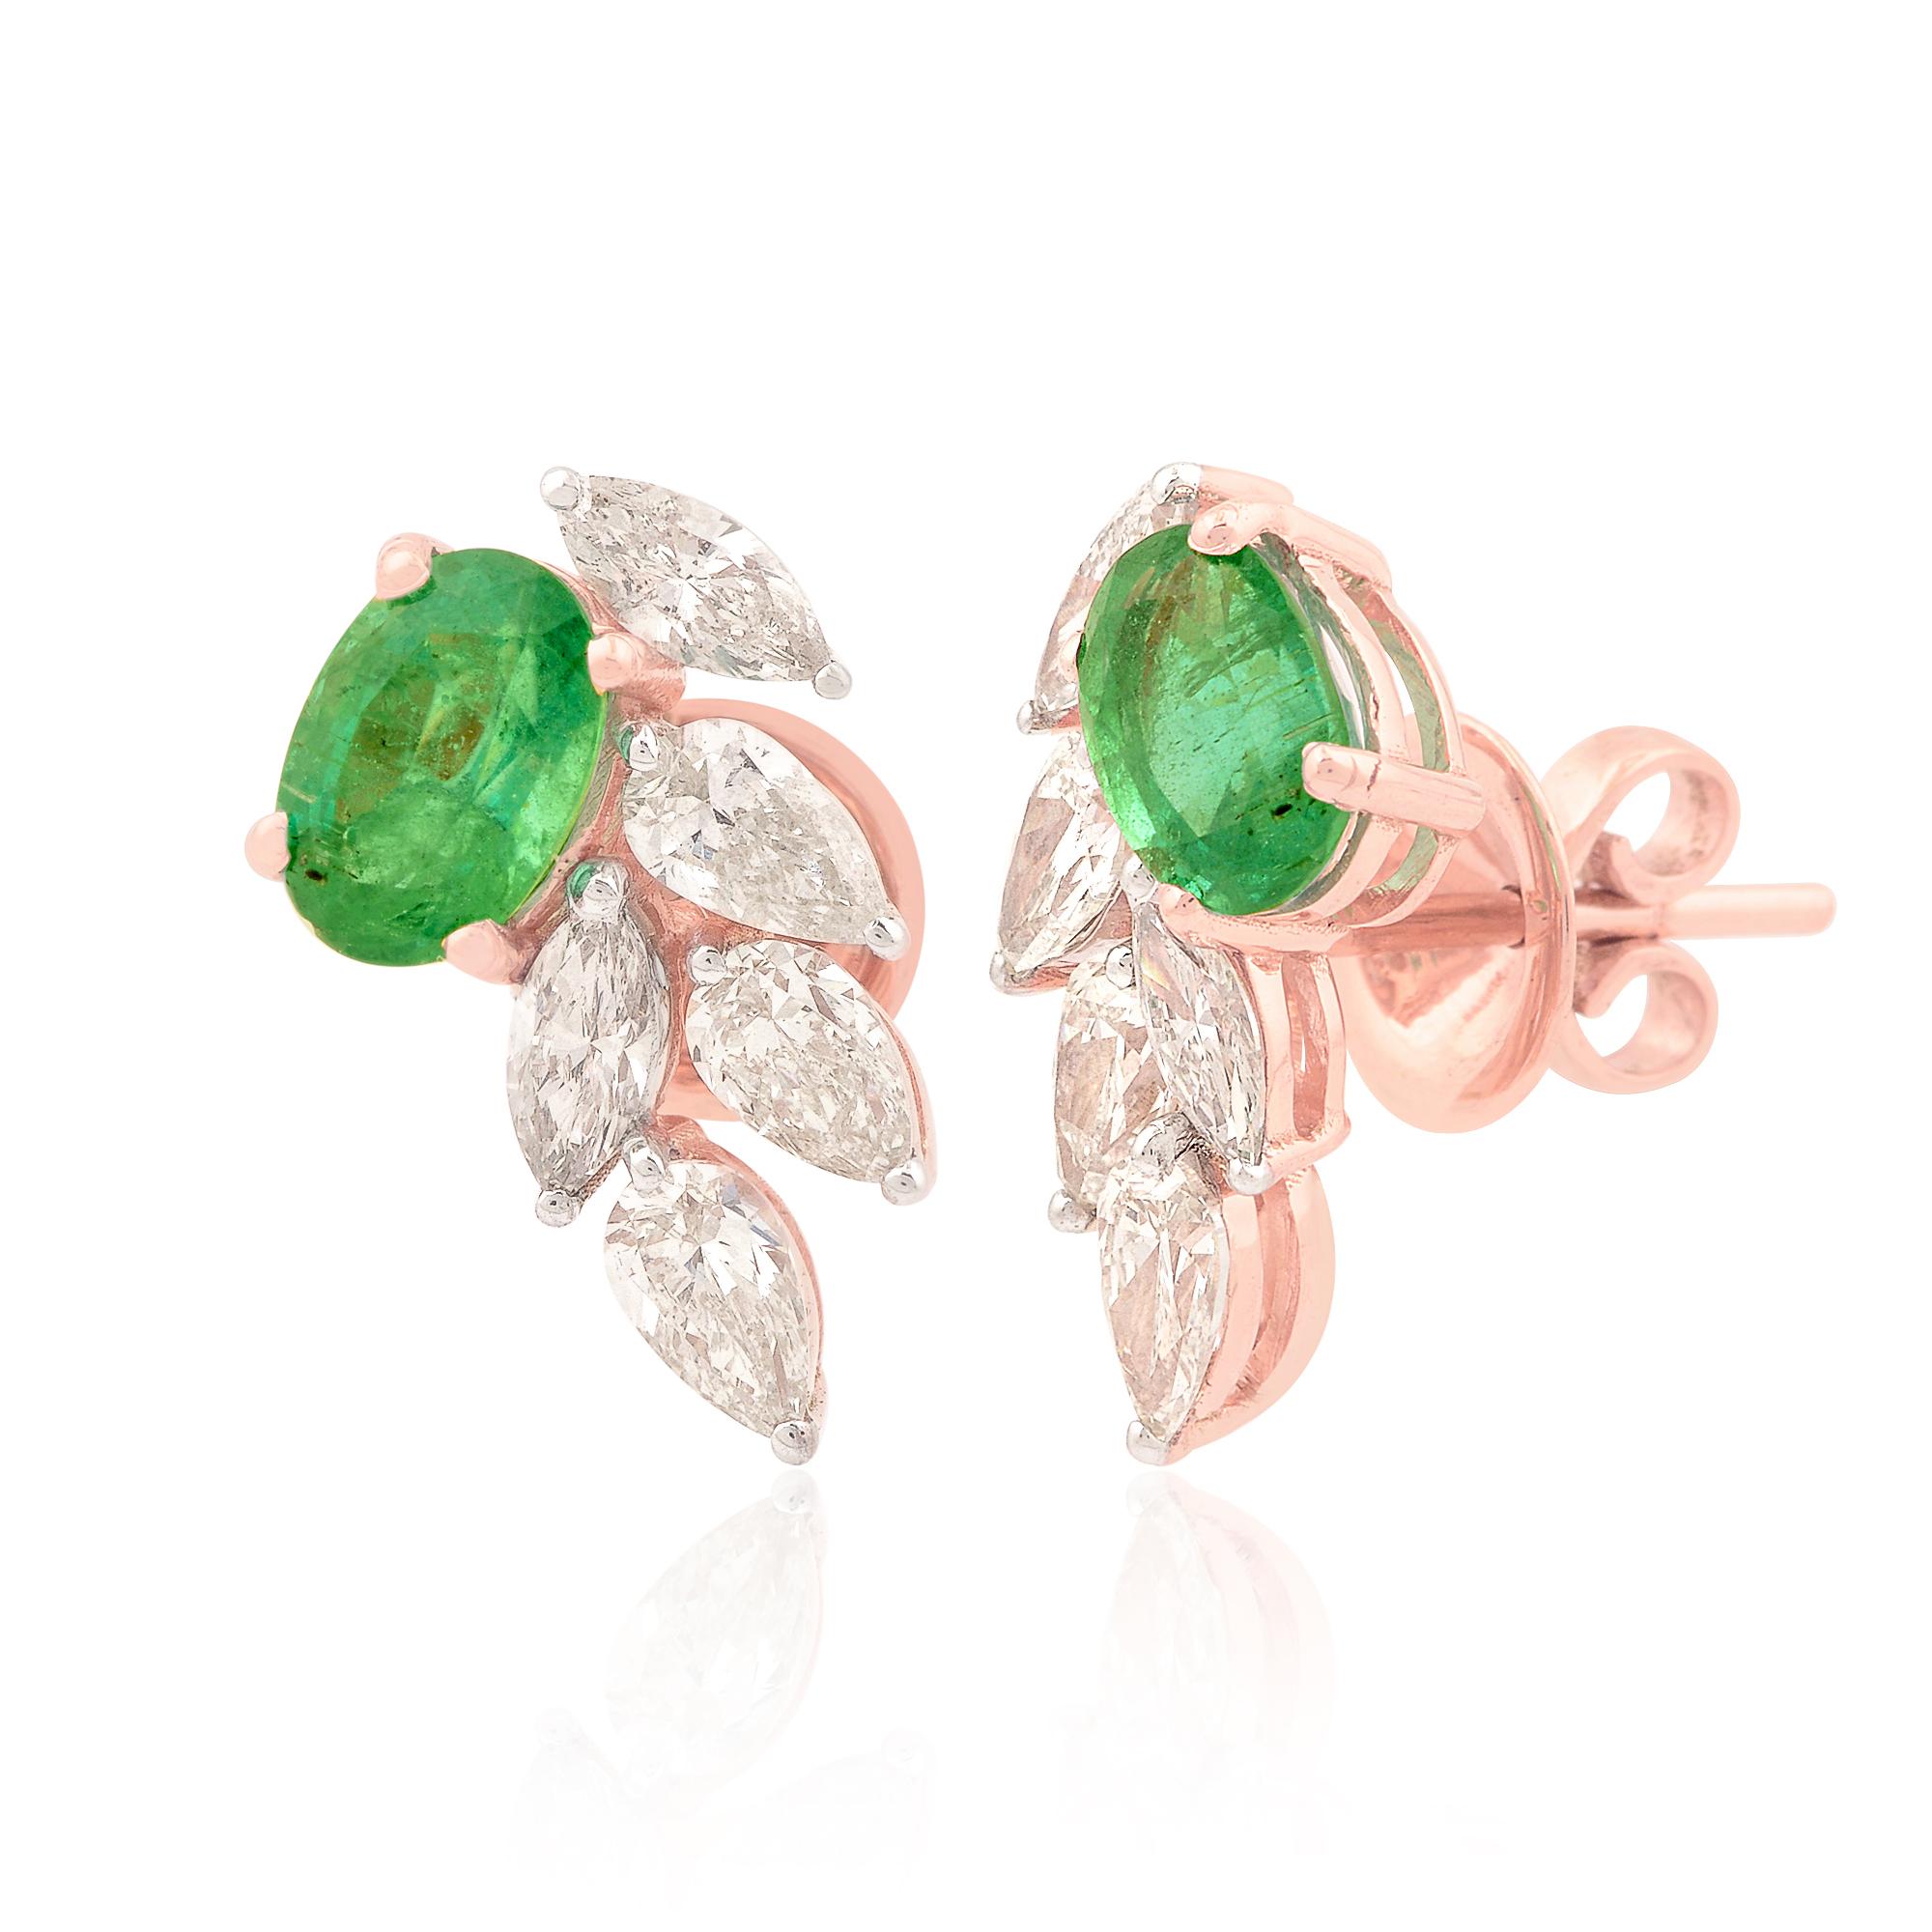 Each oval-shaped Zambian Emerald gemstone is meticulously selected for its exceptional quality and vibrant color, showcasing nature's finest artistry. The lush green tones of the emeralds are beautifully complemented by the warm, romantic glow of 18